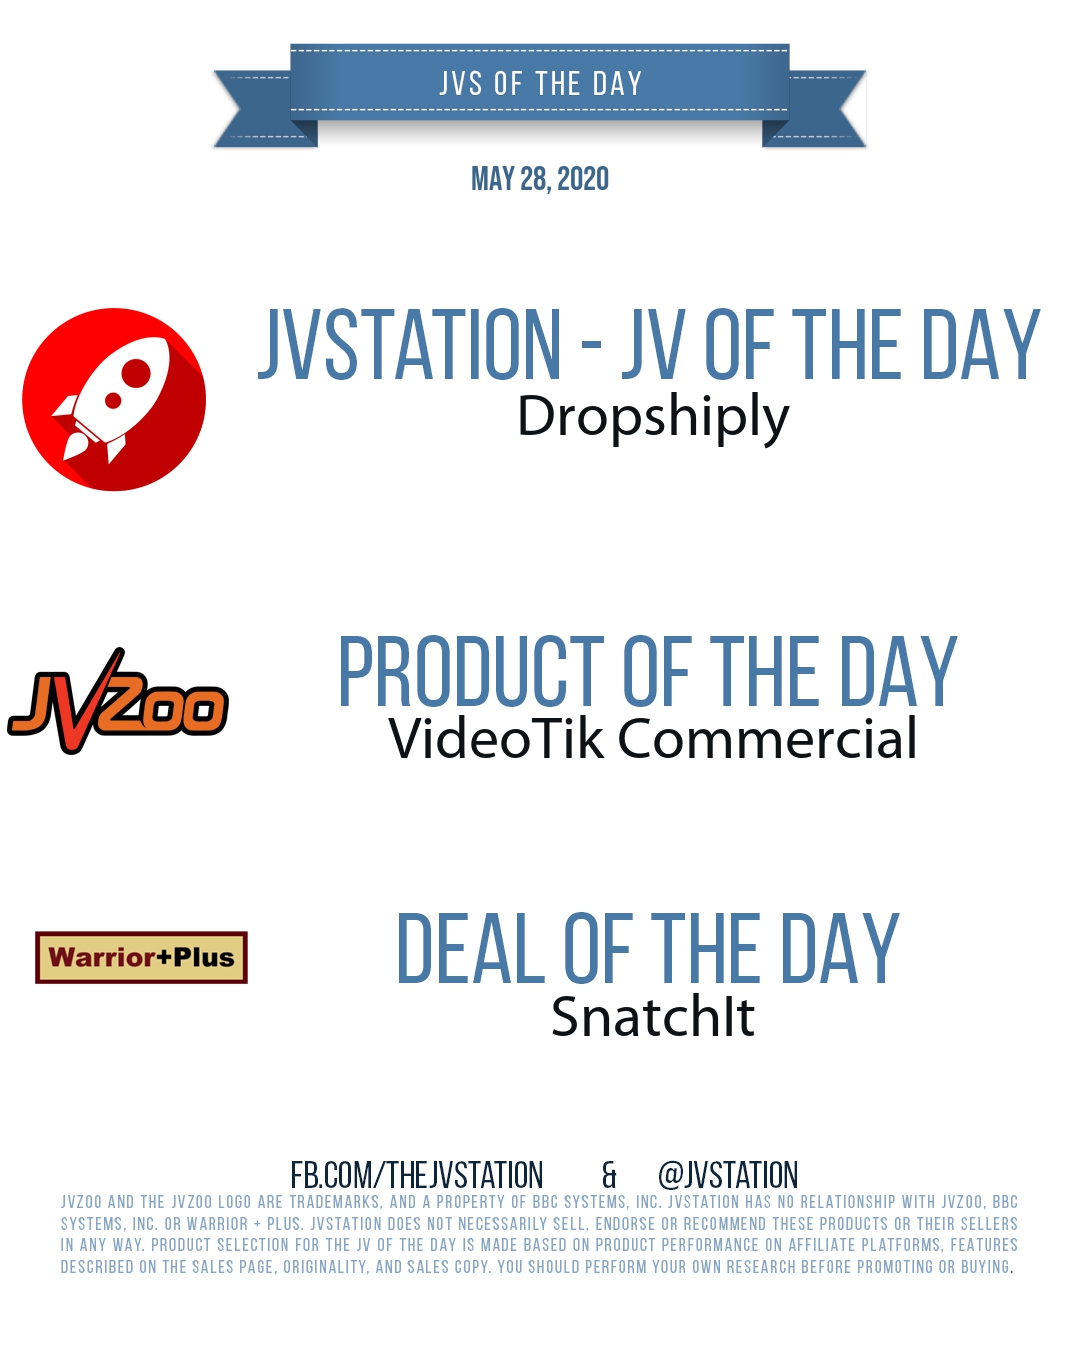 JVs of the day - May 28, 2020